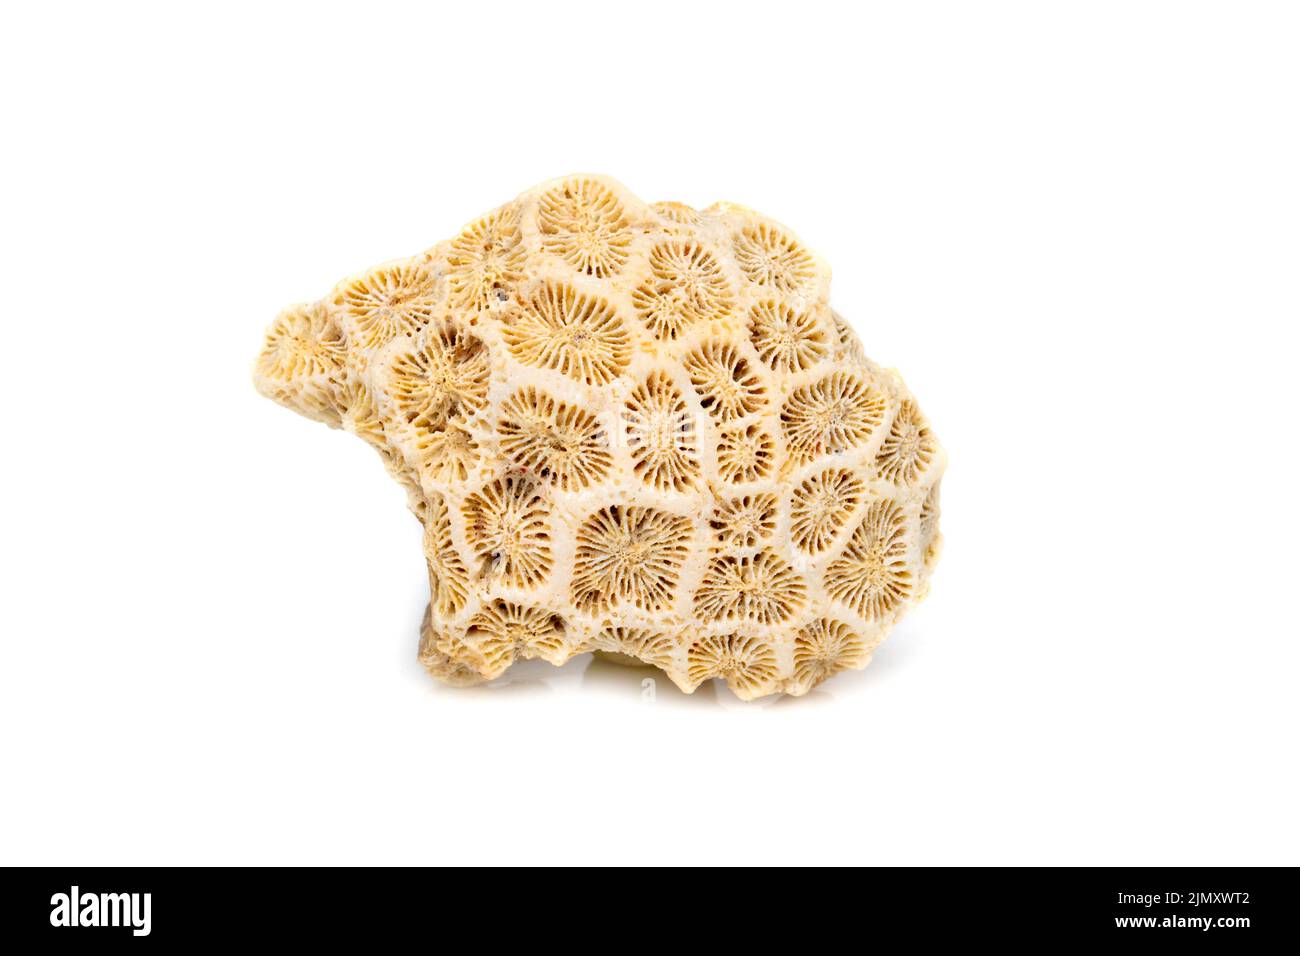 Image of coral cubes on a white background. Undersea Animals. Stock Photo